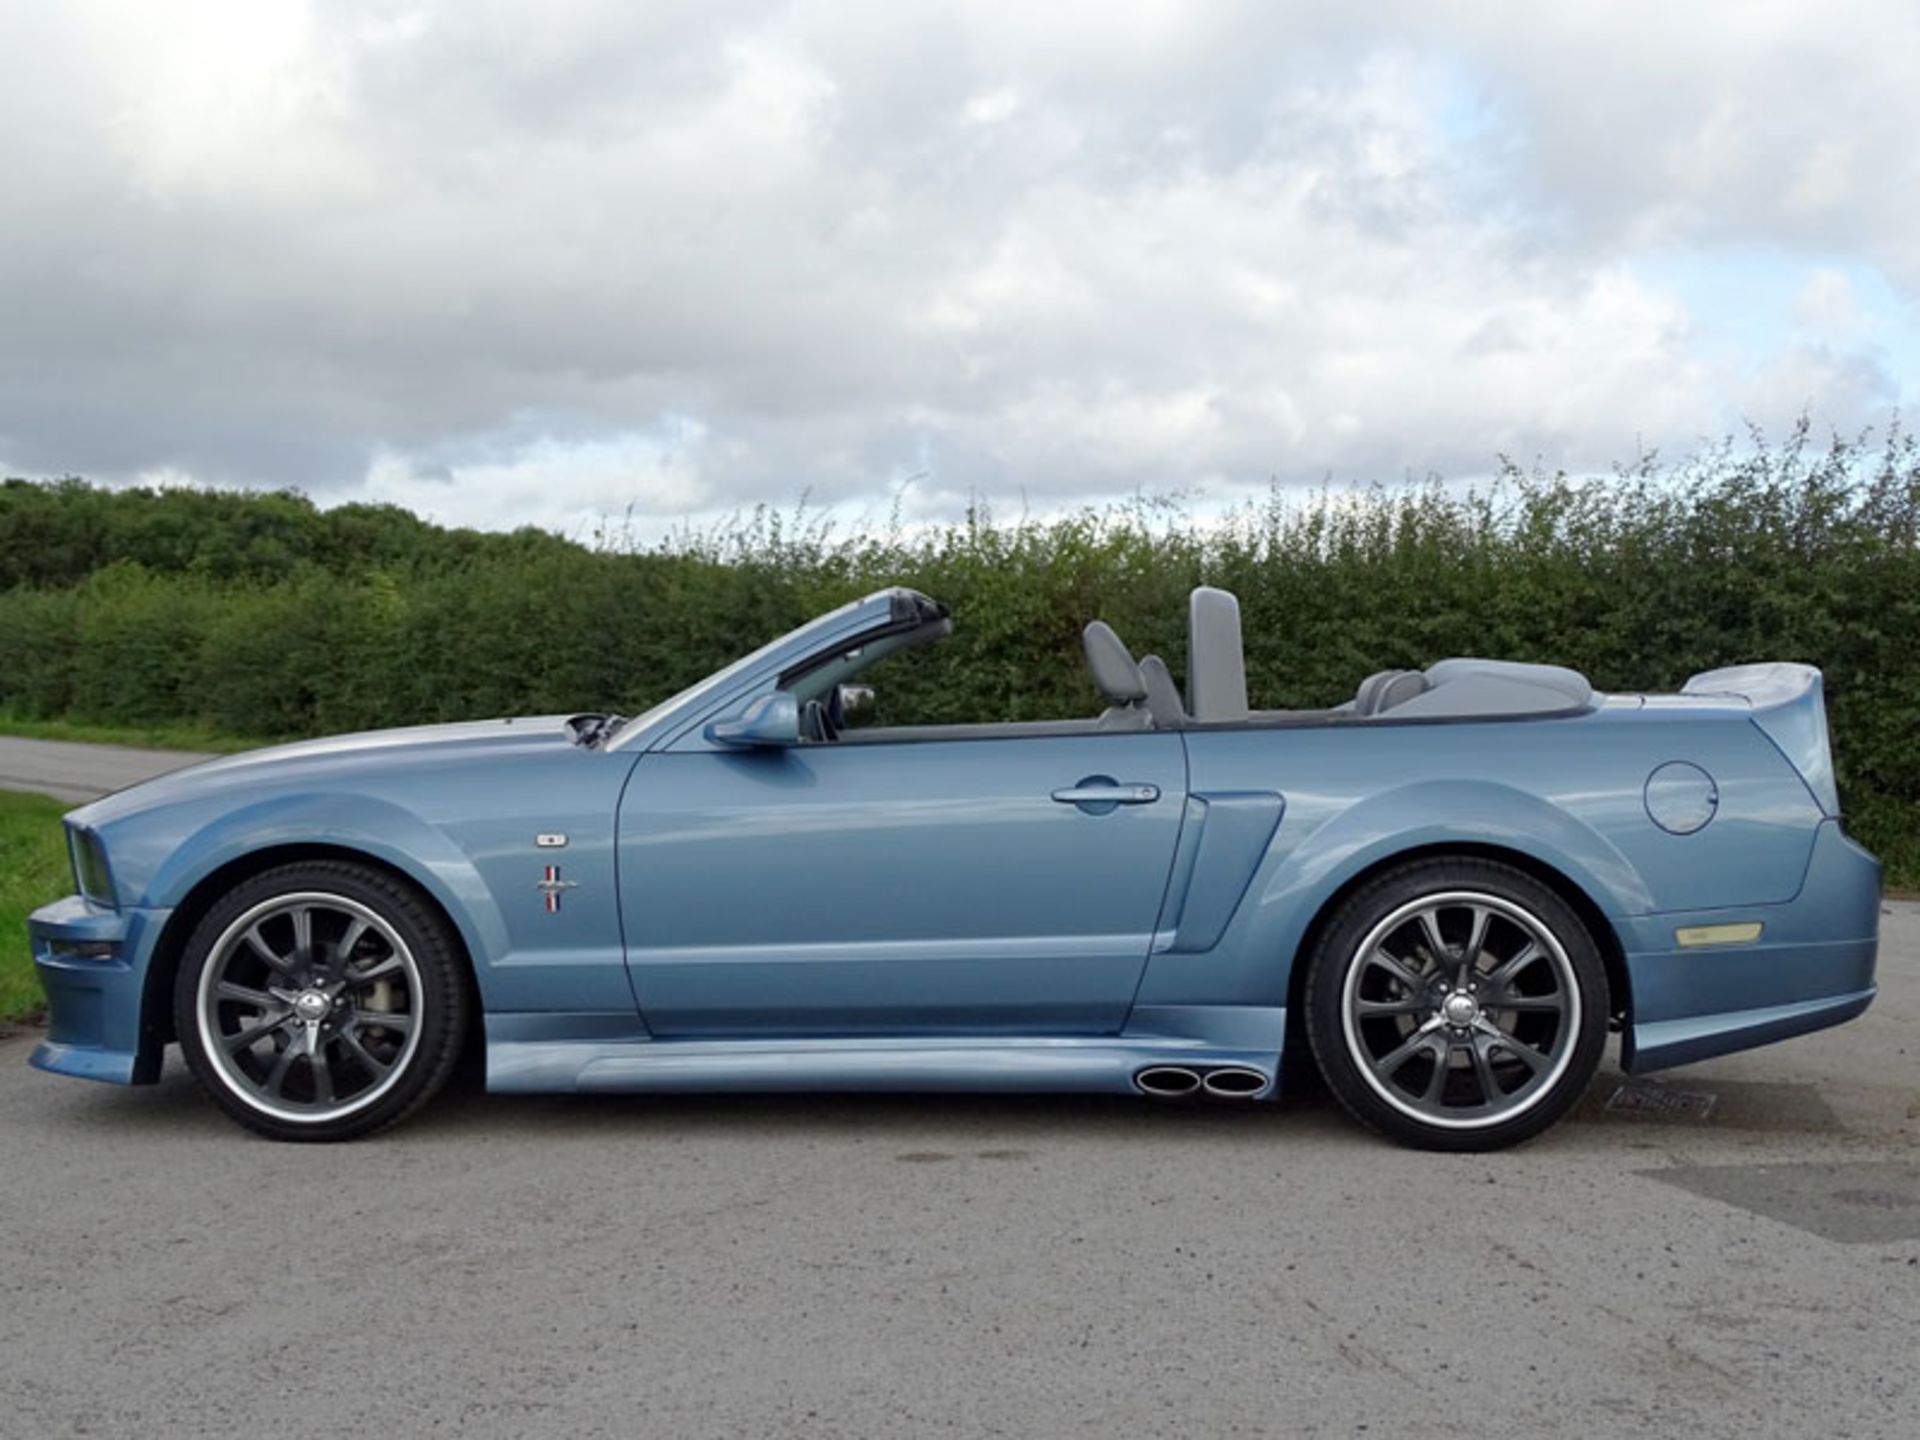 2006 Ford Mustang Convertible - Image 2 of 9